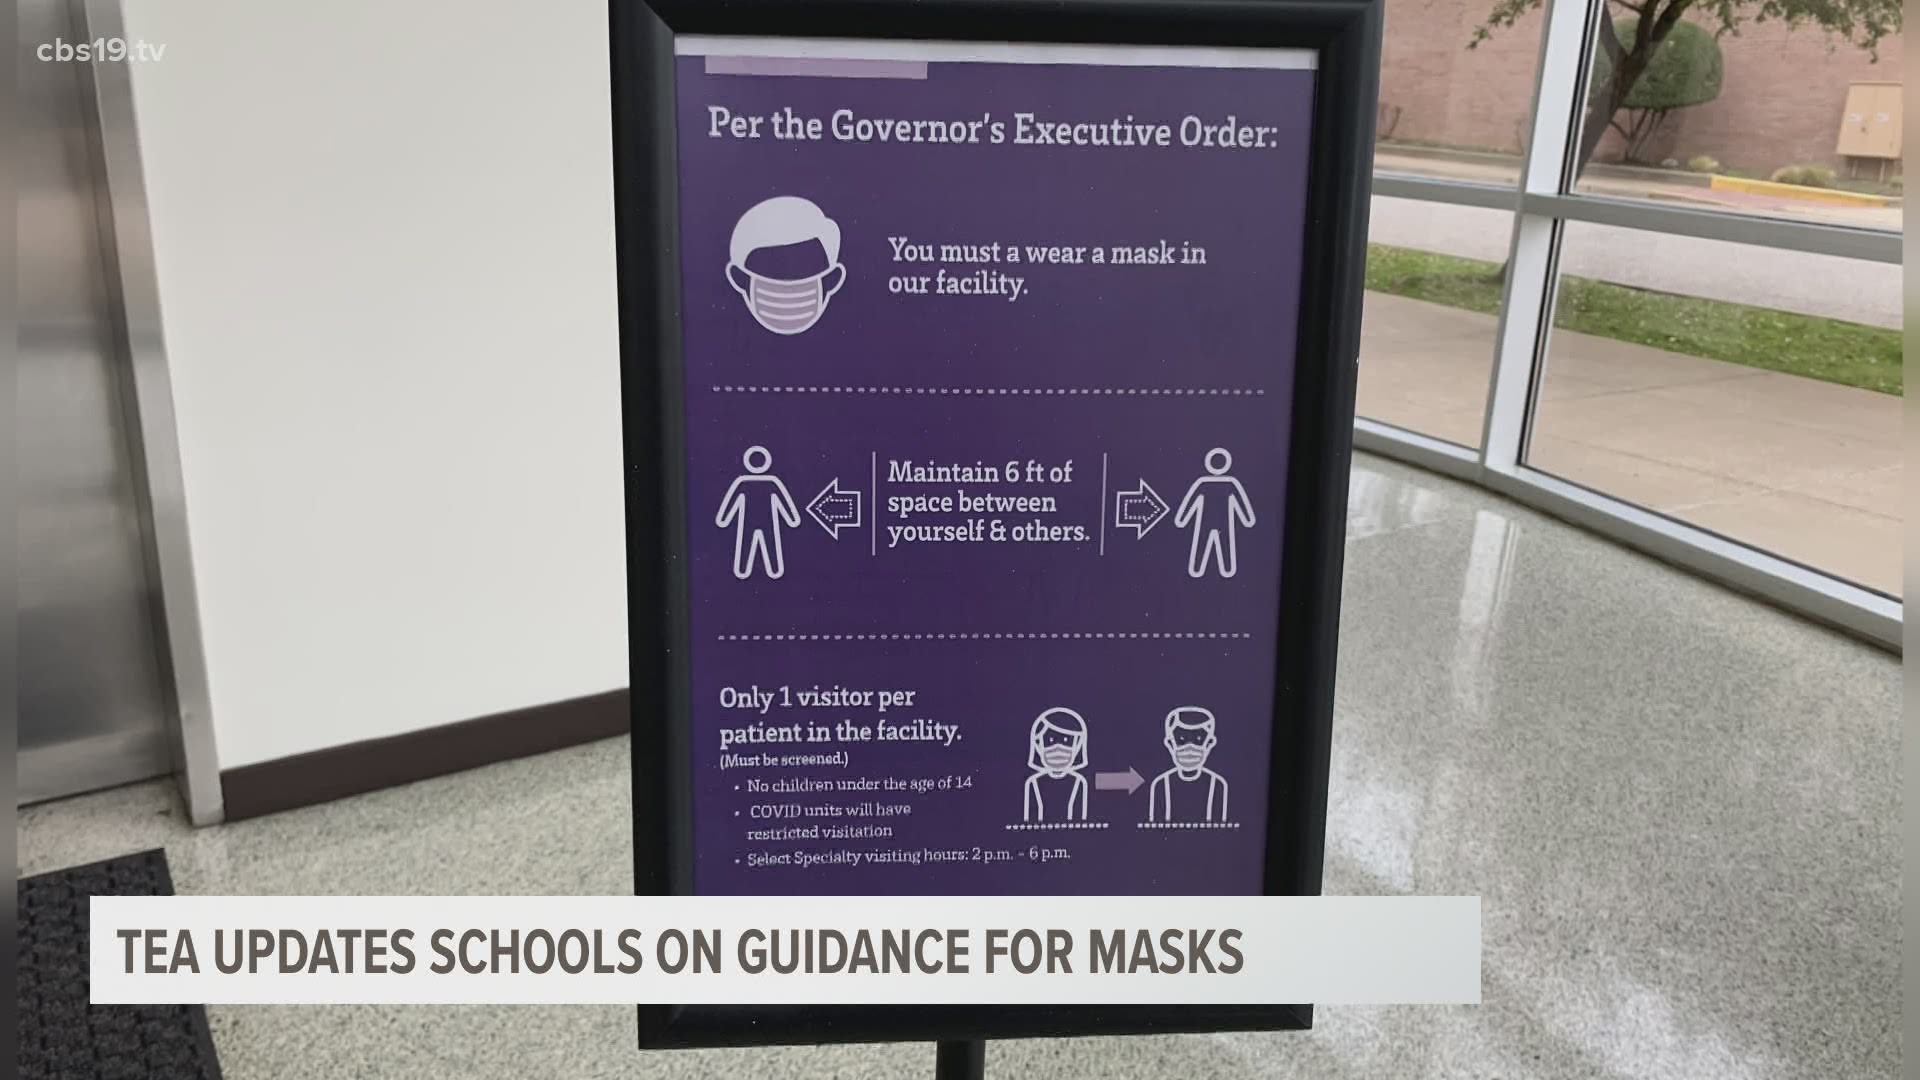 UT Health and CHRISTUS Health plan to require everyone at their facilities to continue wearing a mask as well as following other social distancing guidelines.